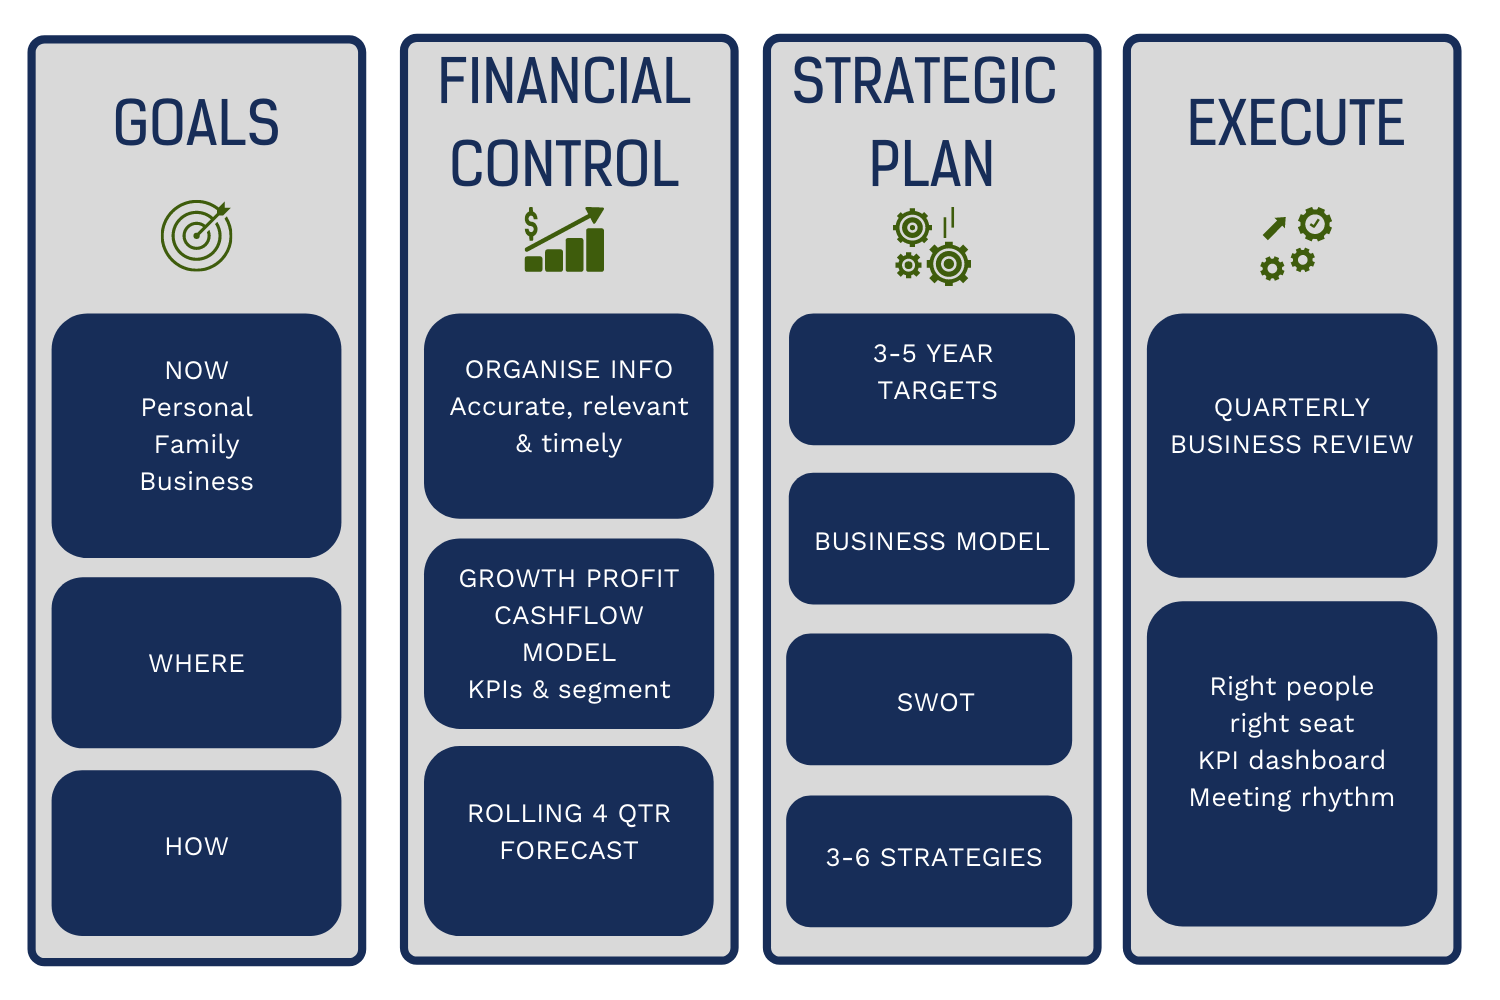 A table outlining a framework for success including goals, financial control, strategic plan and execute.